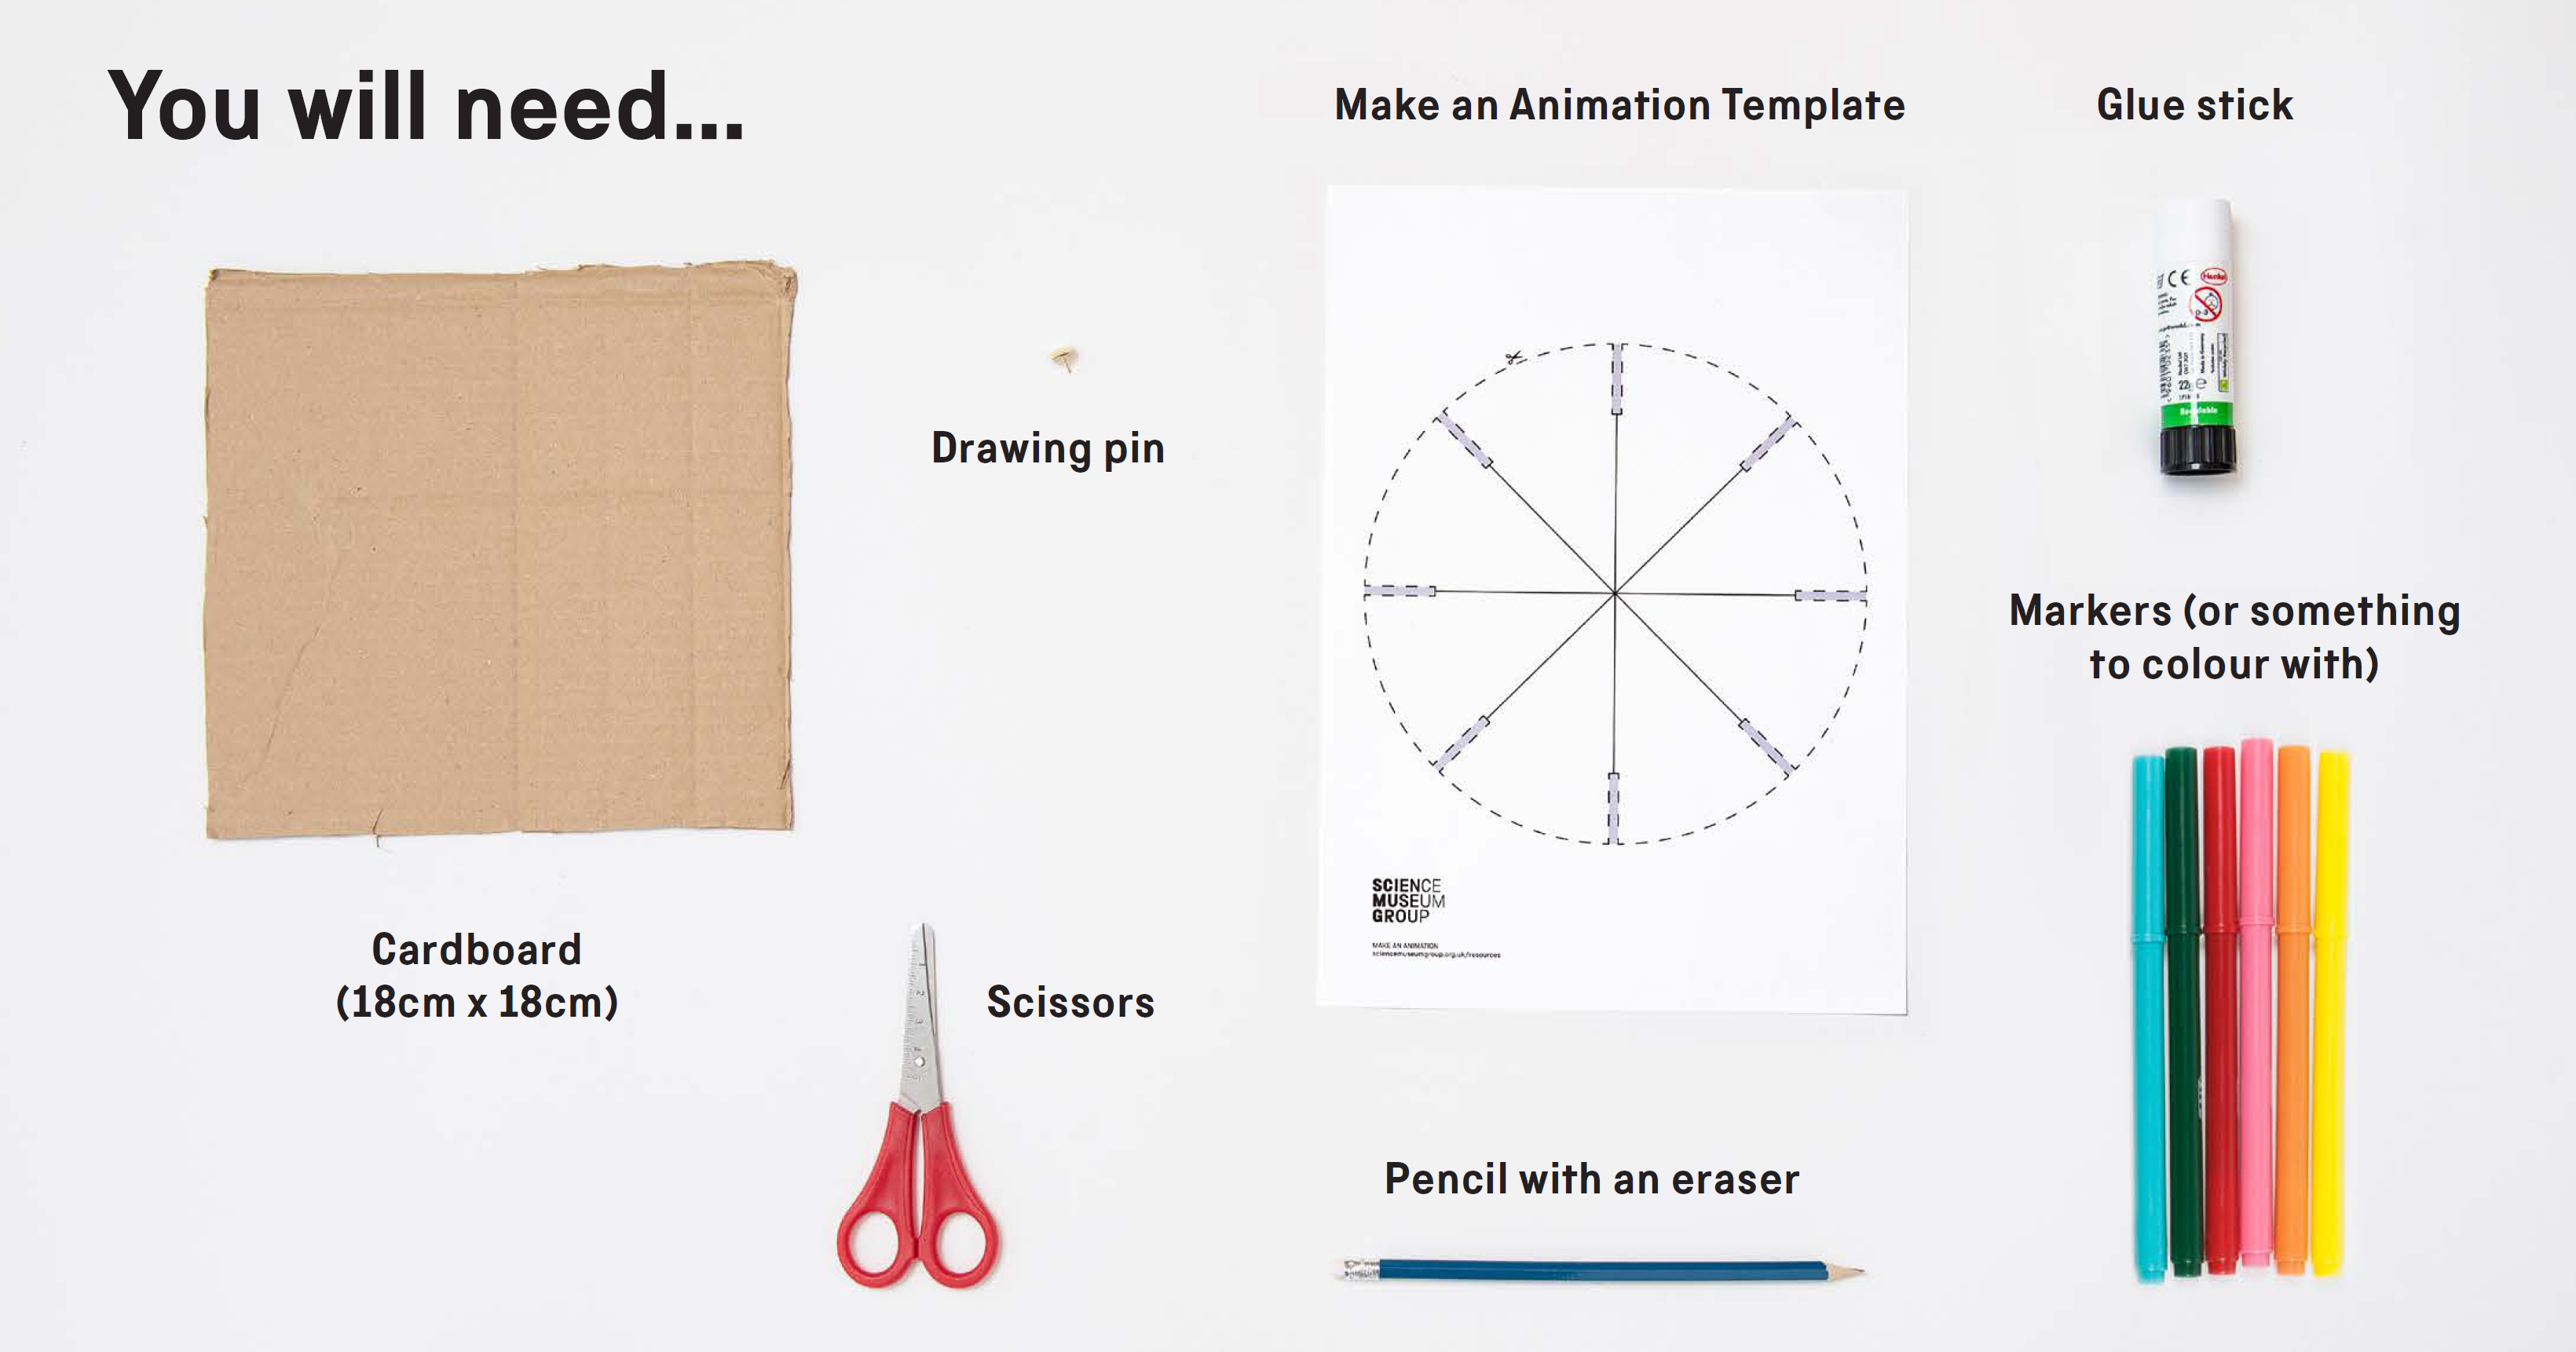 You will need: a printed Make an Animation template, a piece of cardboard (18cm x 18cm), a drawing pin, scissors, glue stick, a pencil with an eraser and markers or something to colour with.